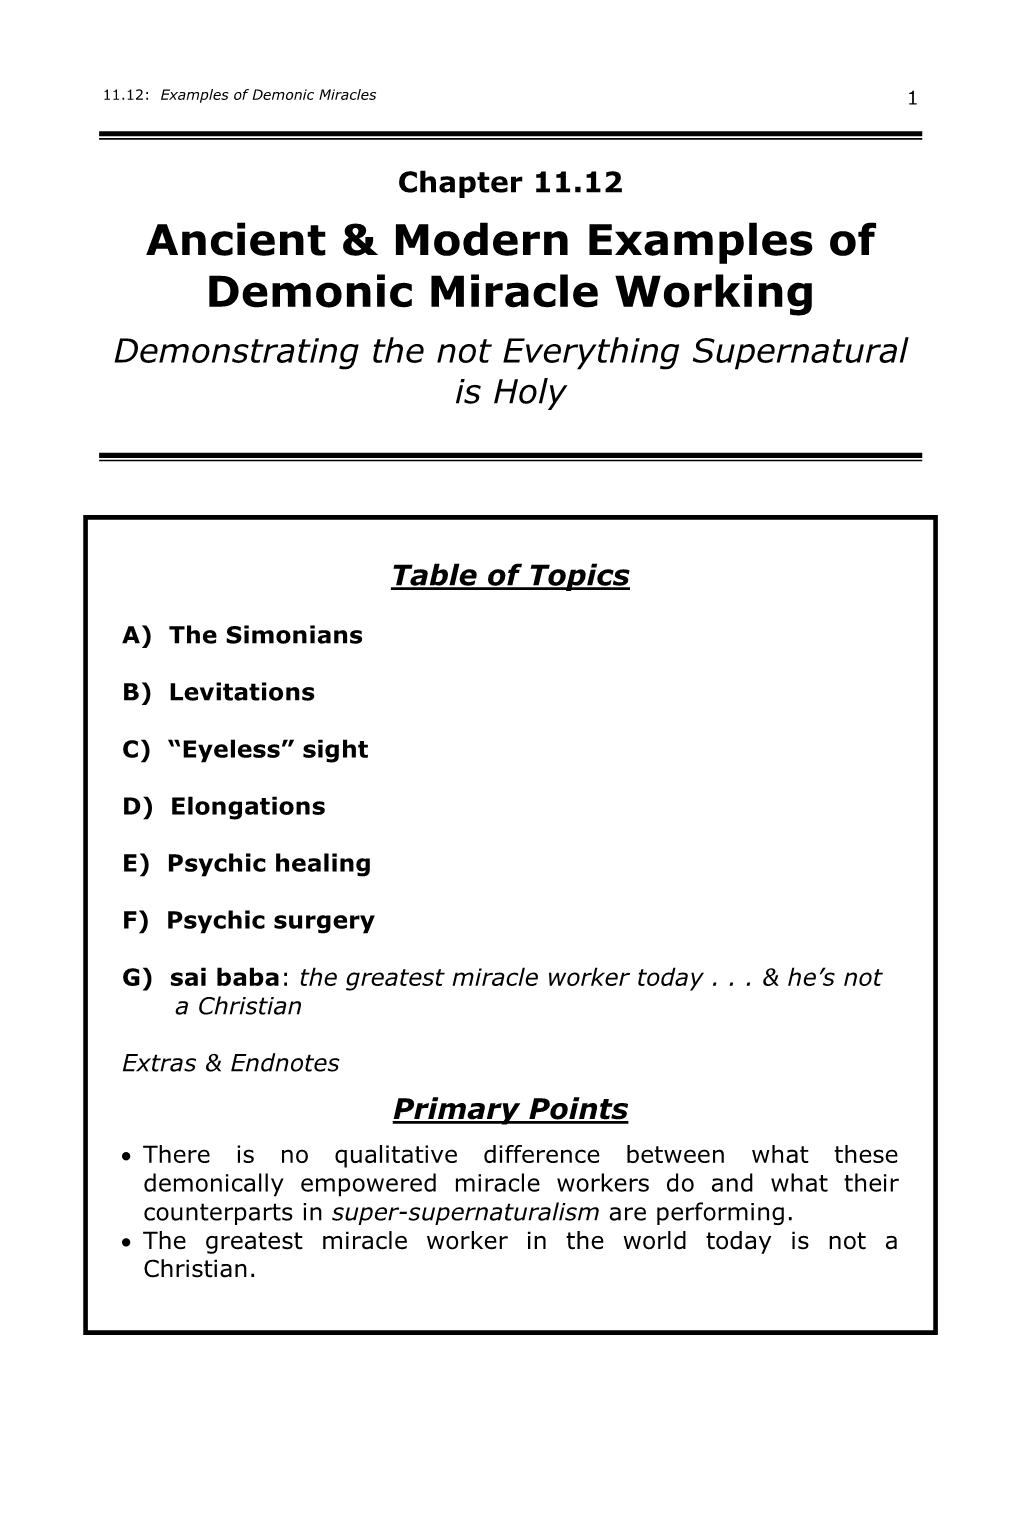 11.12 Examples of Demonic Miracle Working